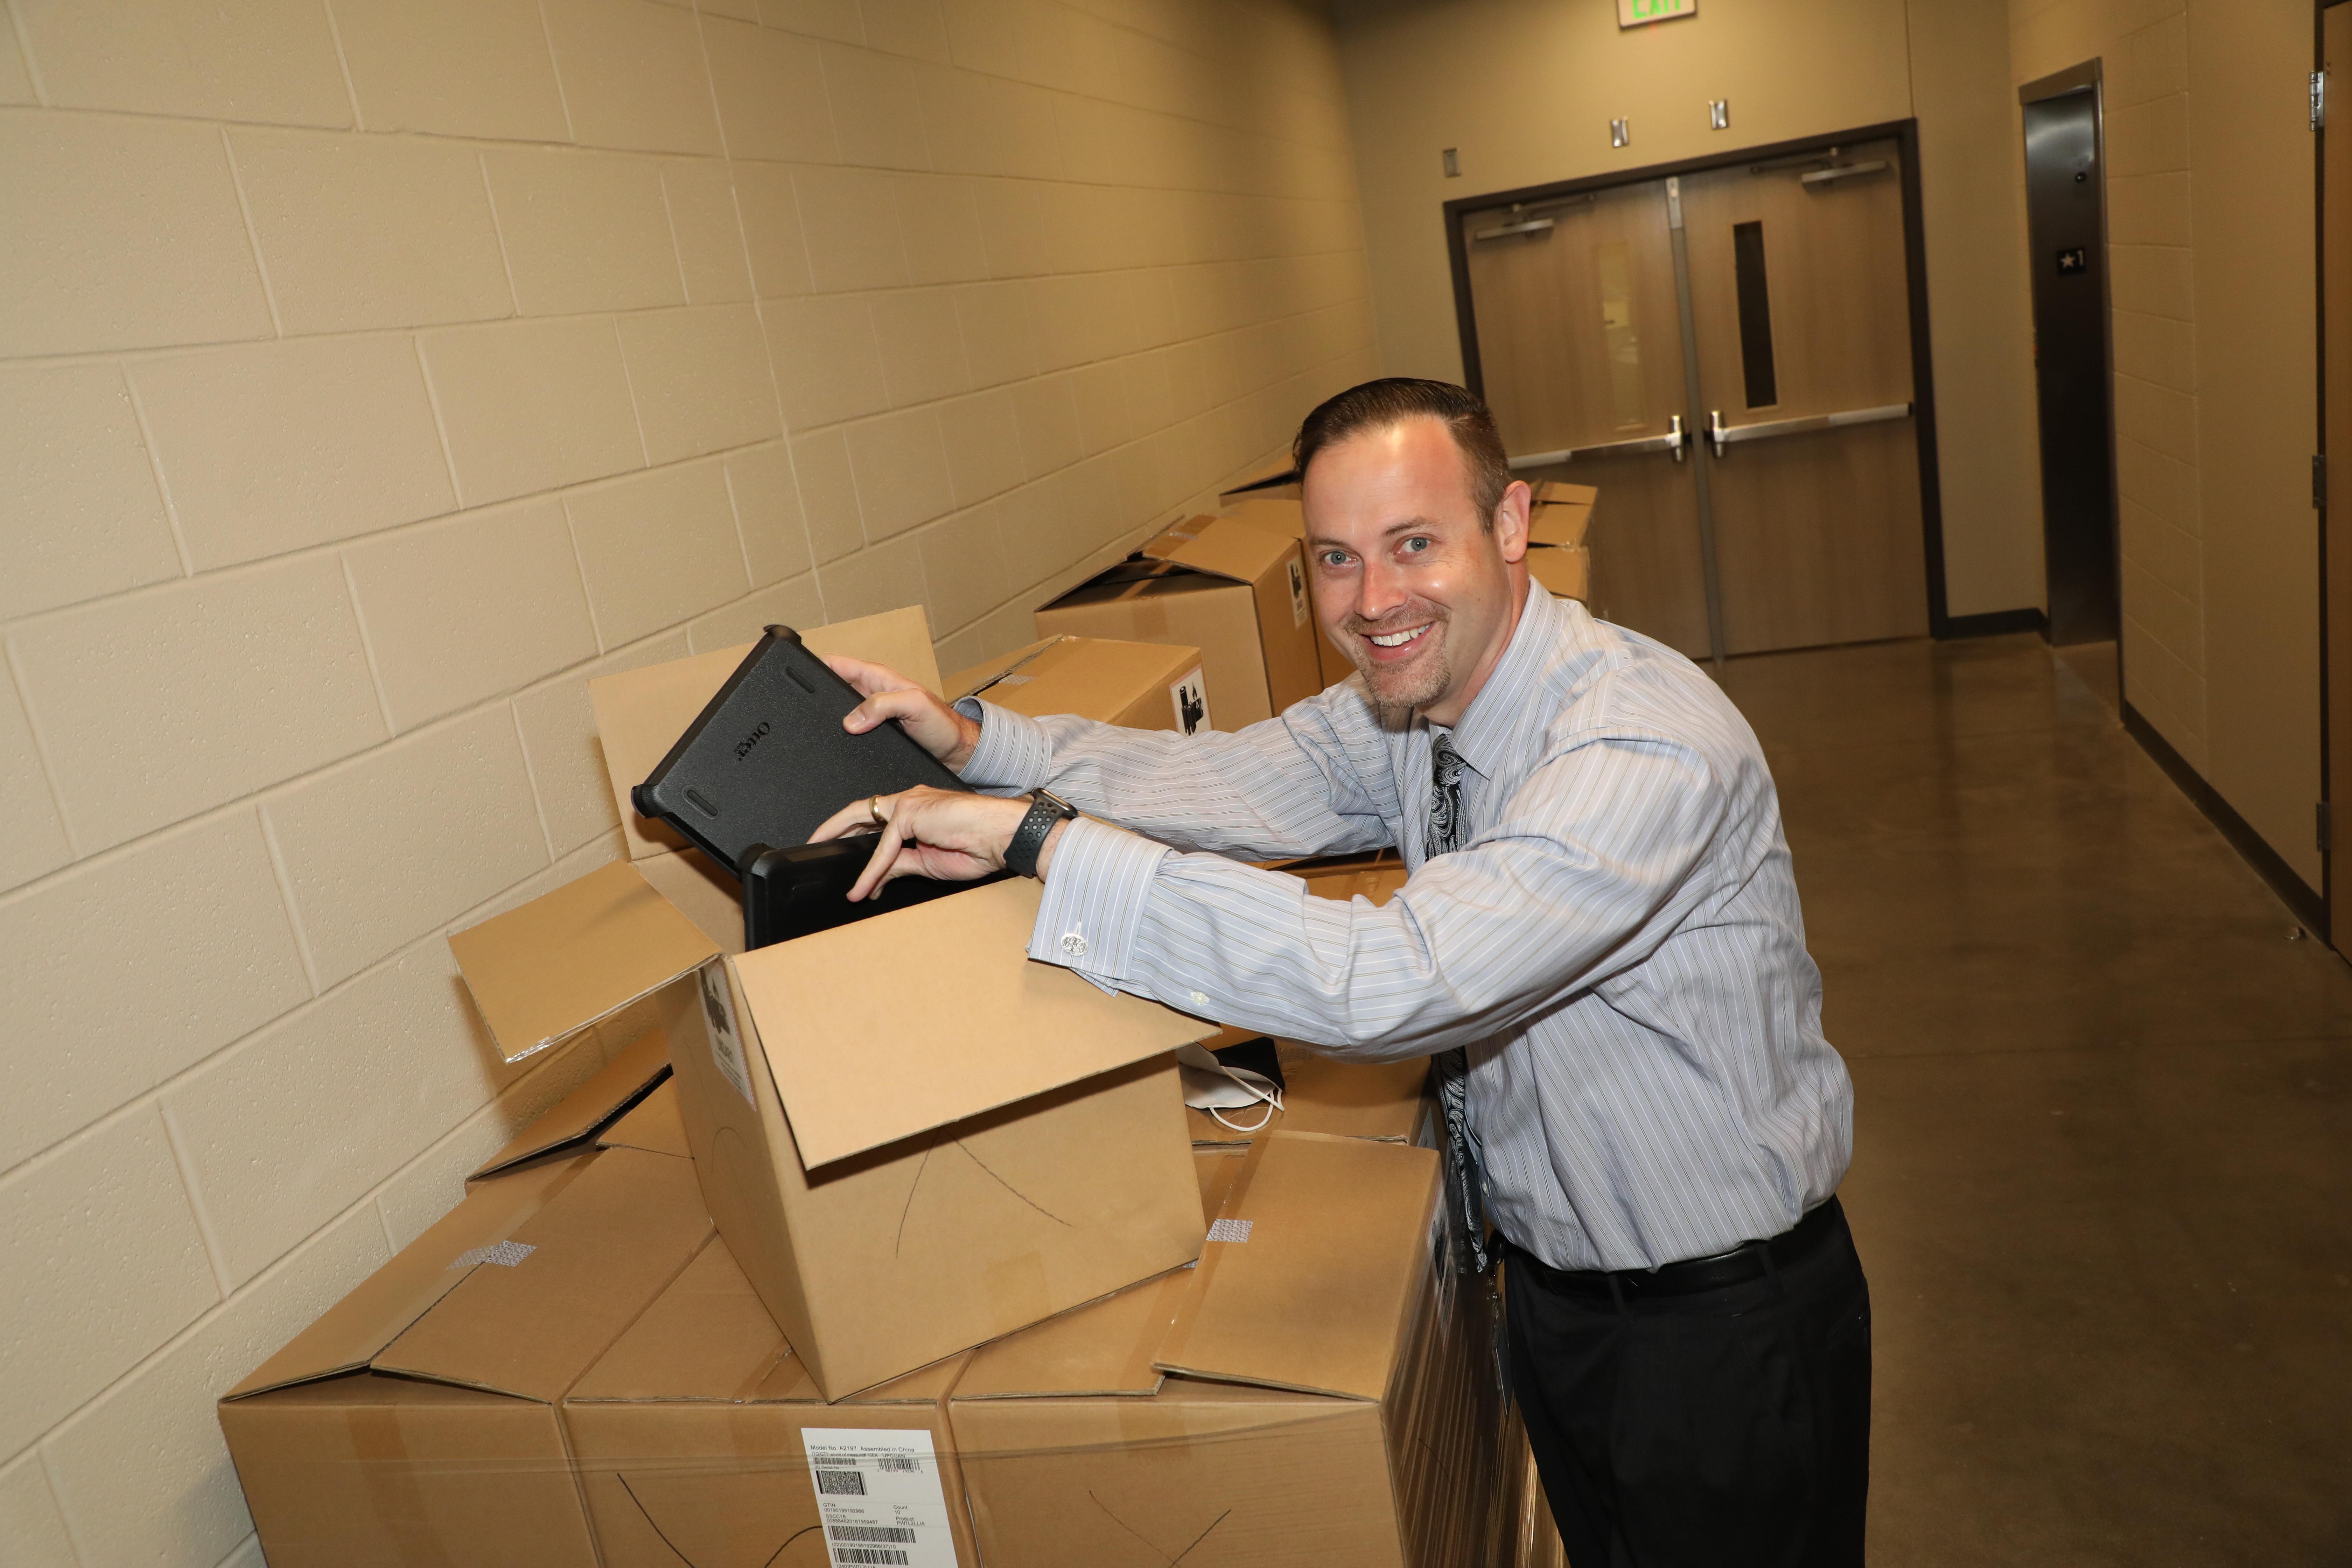 Technology director packages ipads